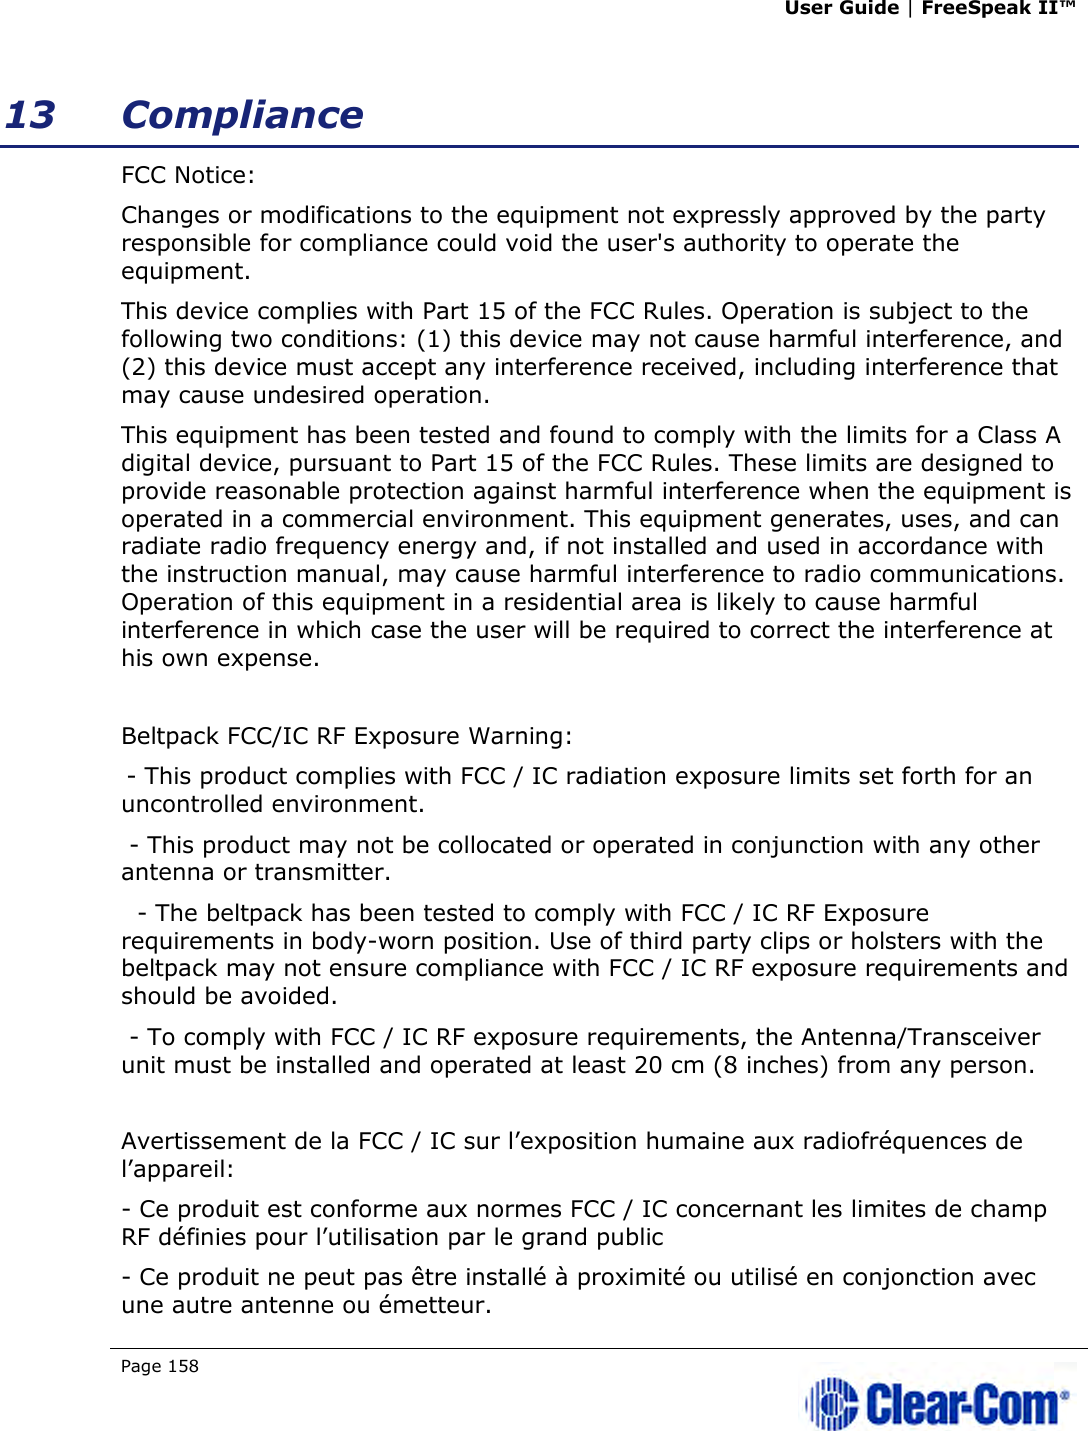 User Guide | FreeSpeak II™  Page 158   13 Compliance FCC Notice: Changes or modifications to the equipment not expressly approved by the party responsible for compliance could void the user&apos;s authority to operate the equipment. This device complies with Part 15 of the FCC Rules. Operation is subject to the following two conditions: (1) this device may not cause harmful interference, and (2) this device must accept any interference received, including interference that may cause undesired operation. This equipment has been tested and found to comply with the limits for a Class A digital device, pursuant to Part 15 of the FCC Rules. These limits are designed to provide reasonable protection against harmful interference when the equipment is operated in a commercial environment. This equipment generates, uses, and can radiate radio frequency energy and, if not installed and used in accordance with the instruction manual, may cause harmful interference to radio communications. Operation of this equipment in a residential area is likely to cause harmful interference in which case the user will be required to correct the interference at his own expense.  Beltpack FCC/IC RF Exposure Warning:   - This product complies with FCC / IC radiation exposure limits set forth for an uncontrolled environment.  - This product may not be collocated or operated in conjunction with any other antenna or transmitter.   - The beltpack has been tested to comply with FCC / IC RF Exposure requirements in body-worn position. Use of third party clips or holsters with the beltpack may not ensure compliance with FCC / IC RF exposure requirements and should be avoided.  - To comply with FCC / IC RF exposure requirements, the Antenna/Transceiver unit must be installed and operated at least 20 cm (8 inches) from any person.  Avertissement de la FCC / IC sur l’exposition humaine aux radiofréquences de l’appareil: - Ce produit est conforme aux normes FCC / IC concernant les limites de champ RF définies pour l’utilisation par le grand public - Ce produit ne peut pas être installé à proximité ou utilisé en conjonction avec une autre antenne ou émetteur. 